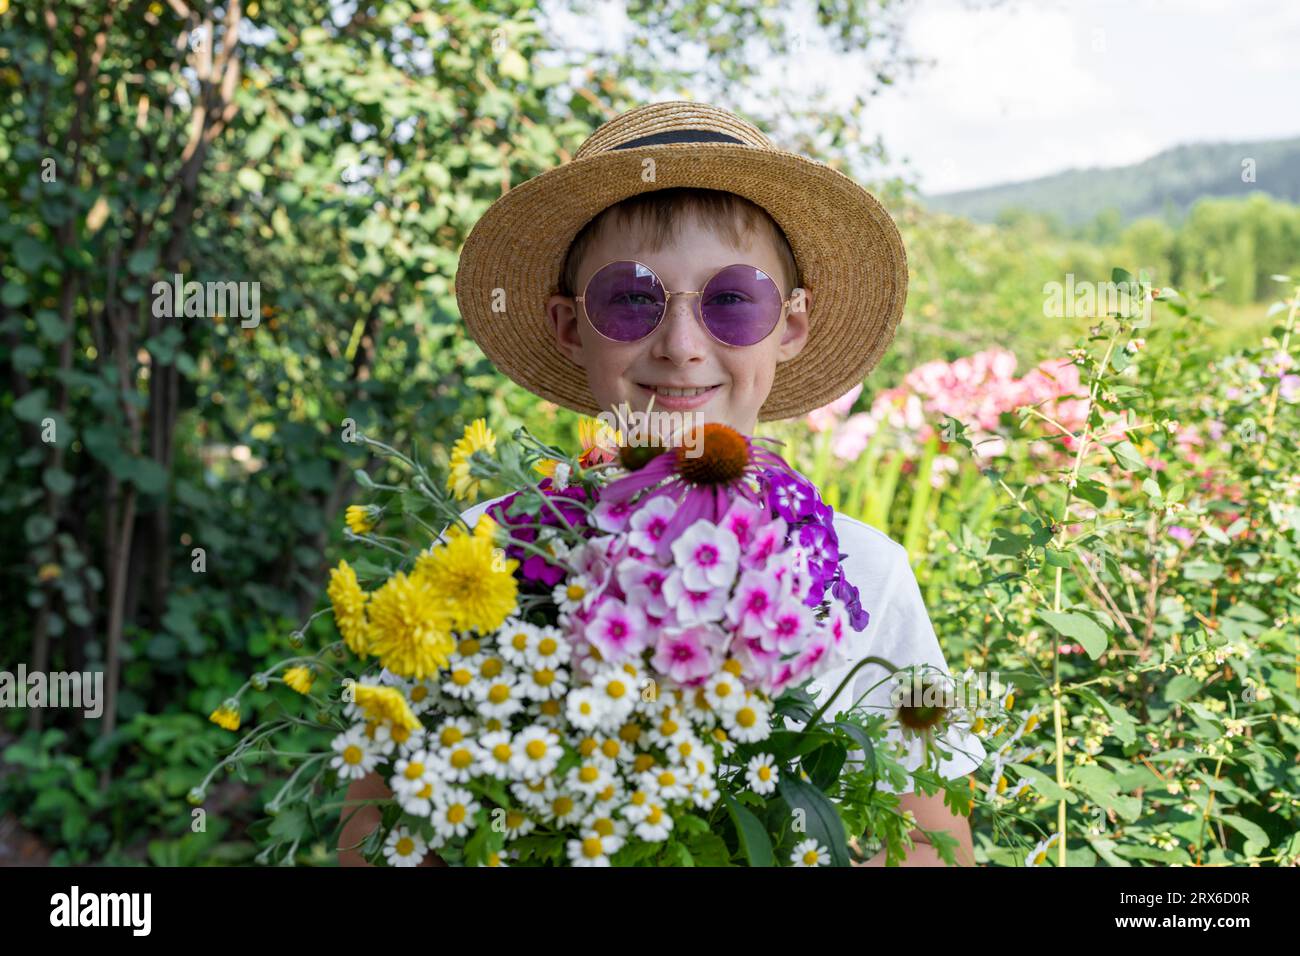 Happy boy wearing hat holding various flowers in garden Stock Photo